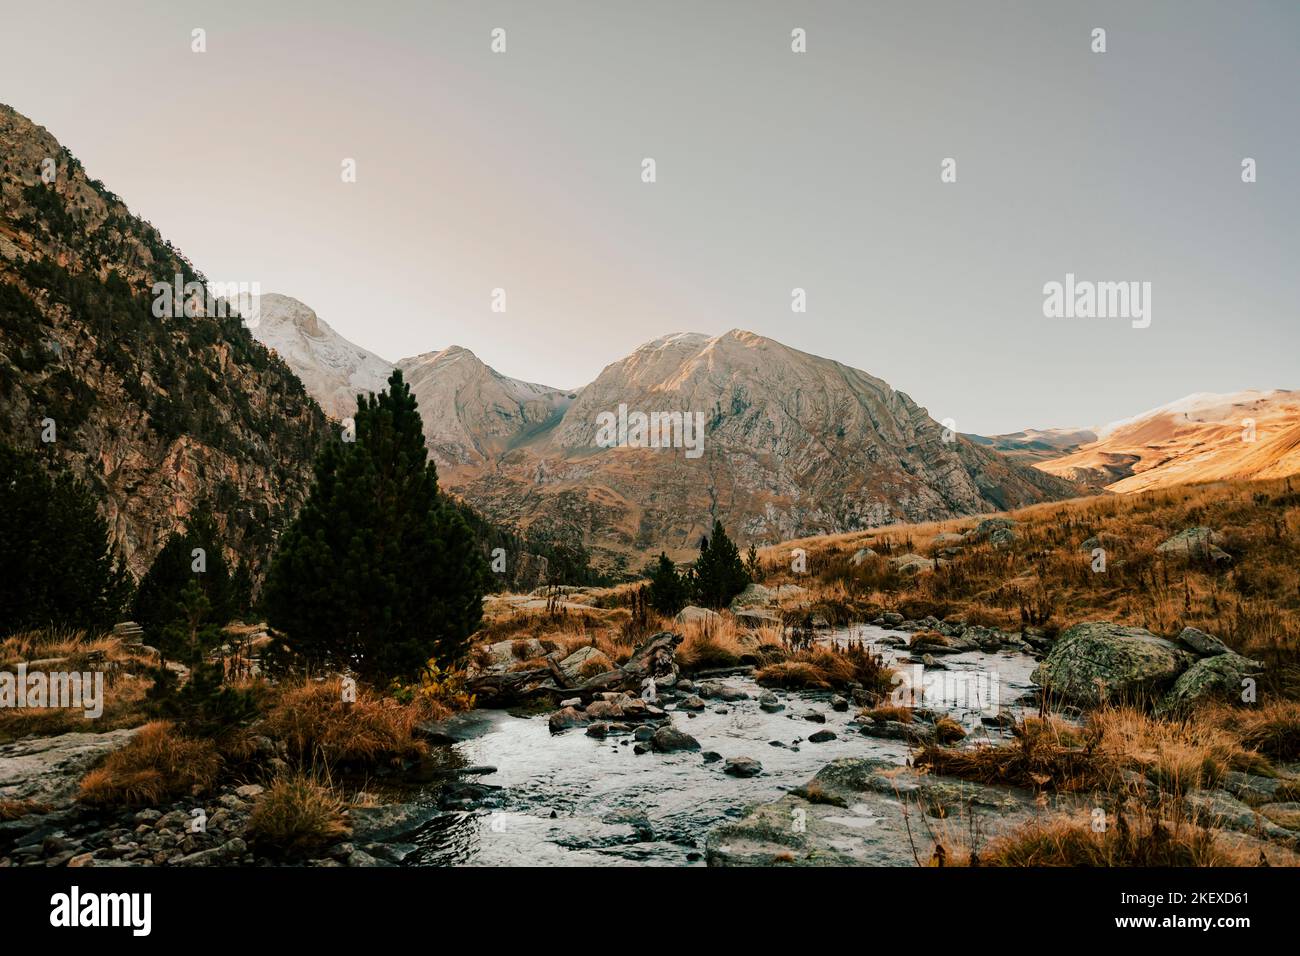 River crossing a valley with a mountain in the background Stock Photo